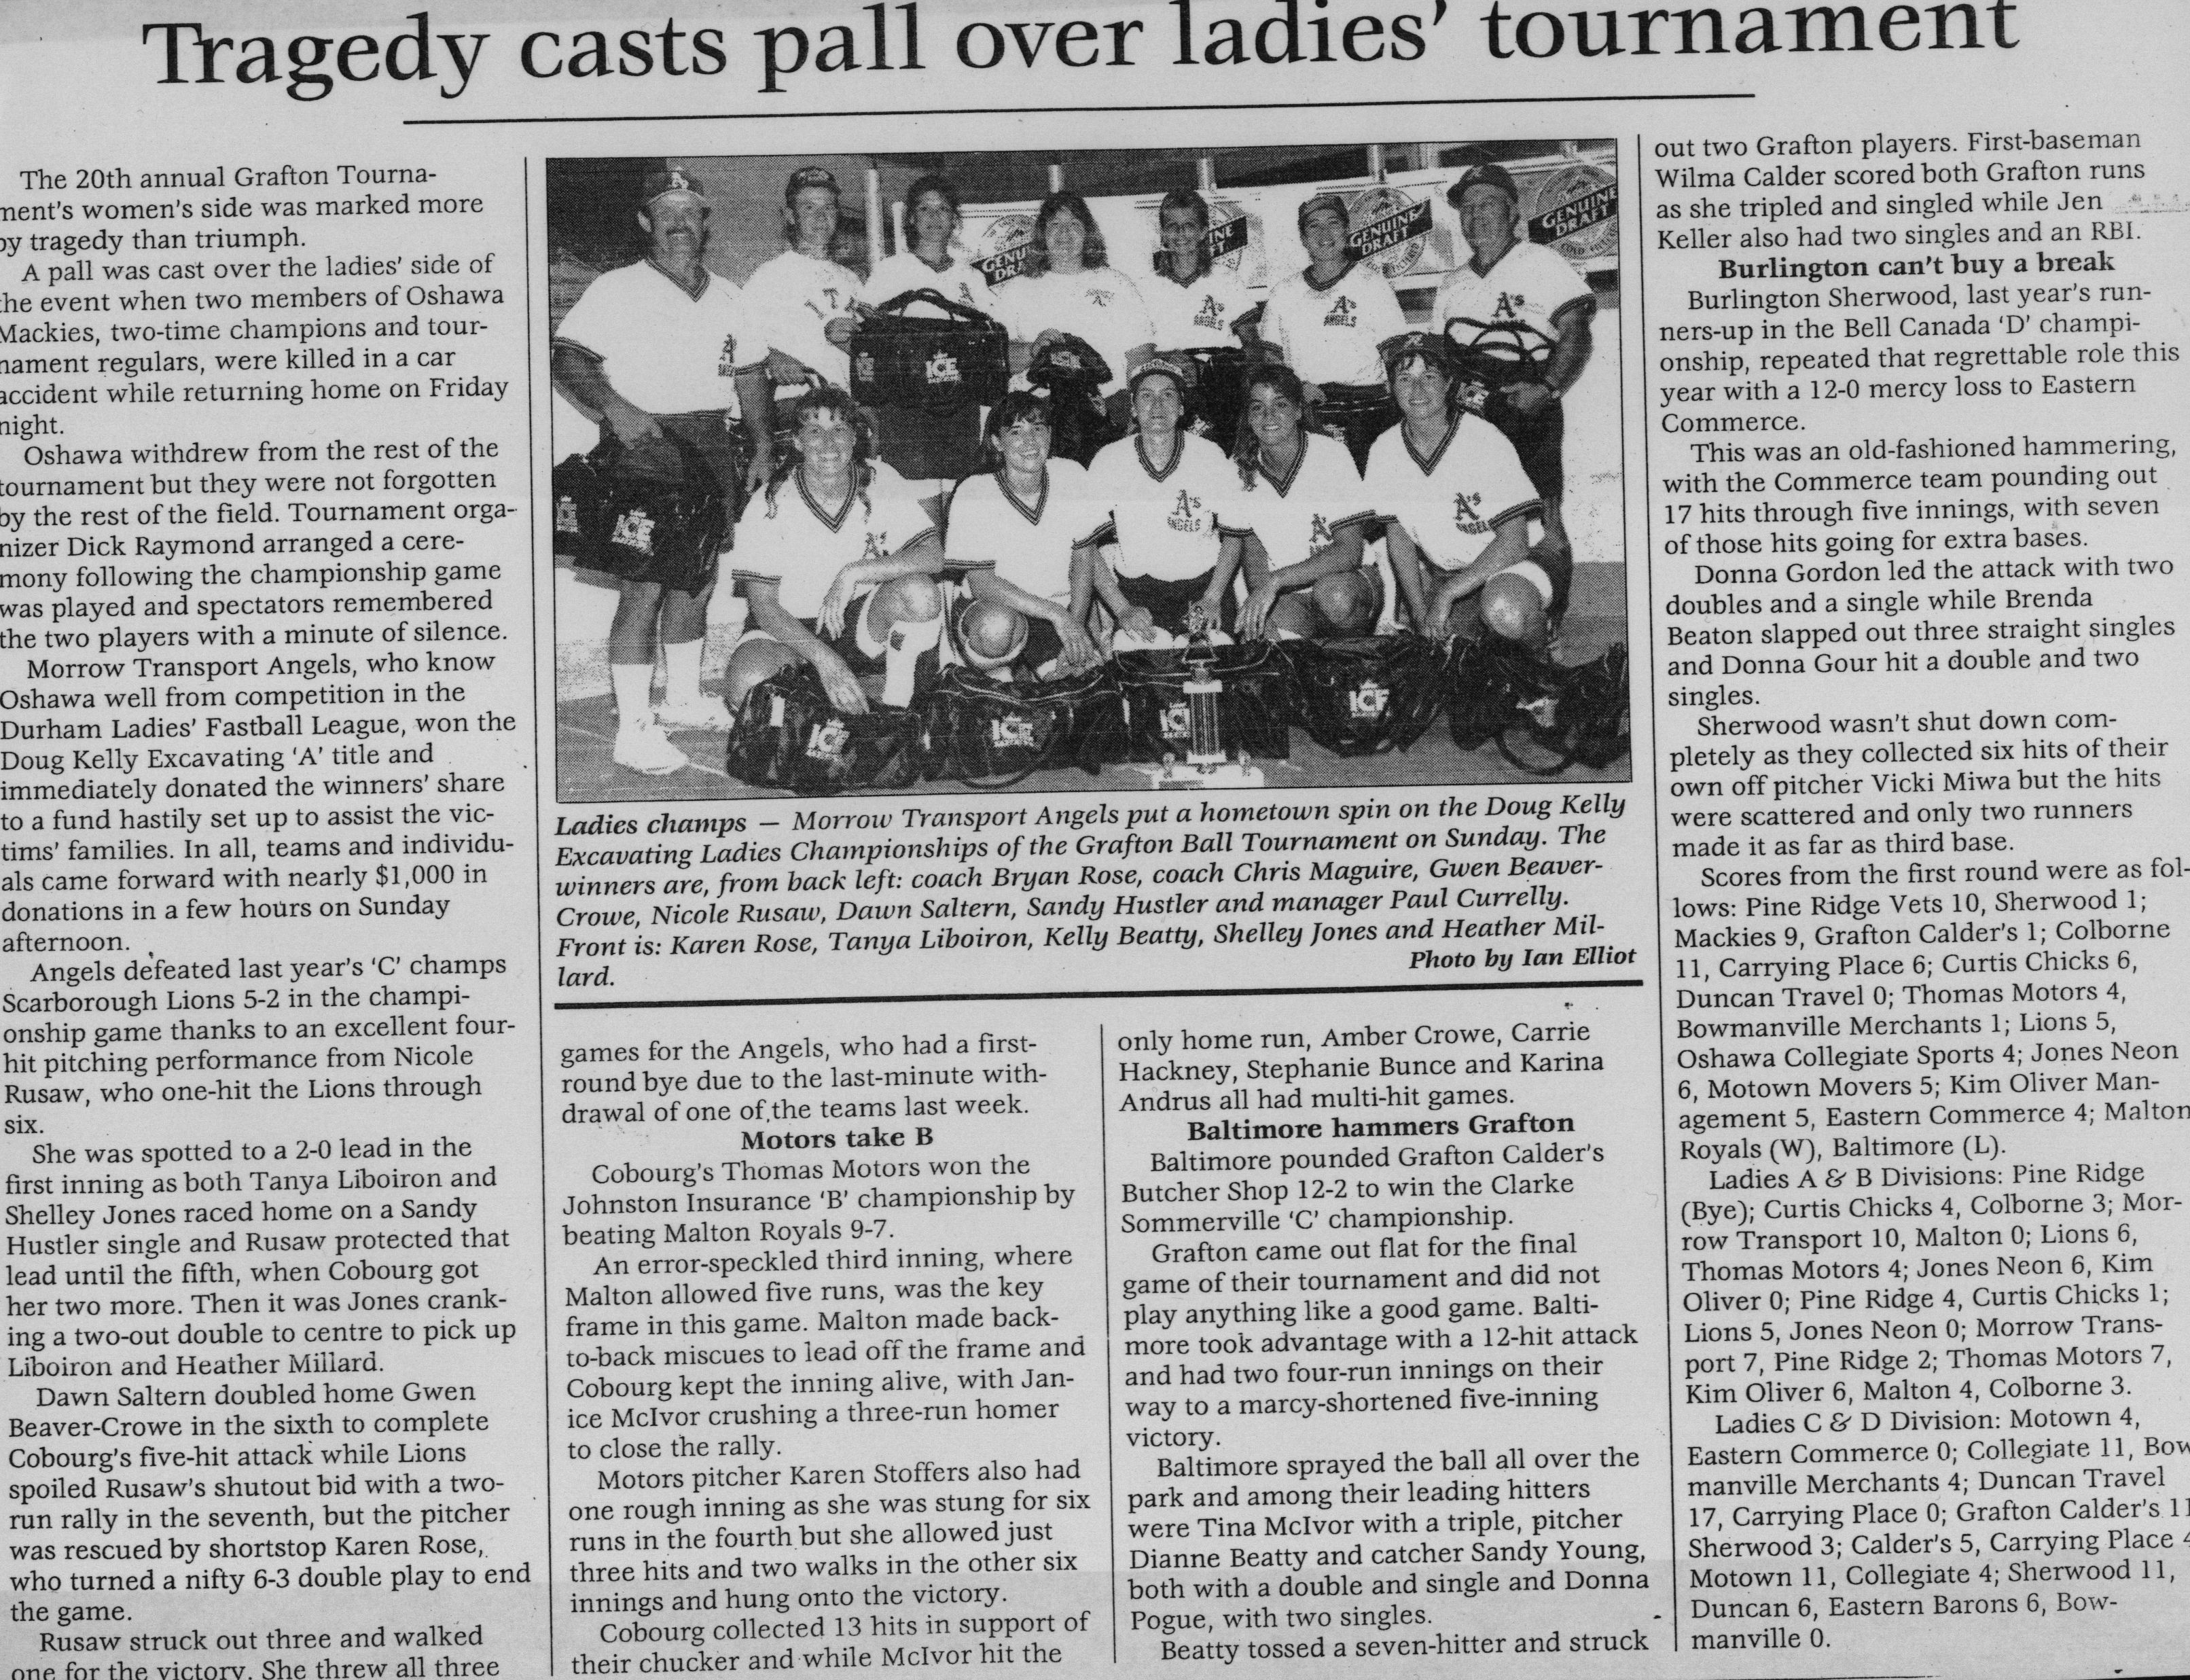 Softball -Grafton Tournament -1993 -Ladies-Summary and A Champs-Cobourg Morrow Angels